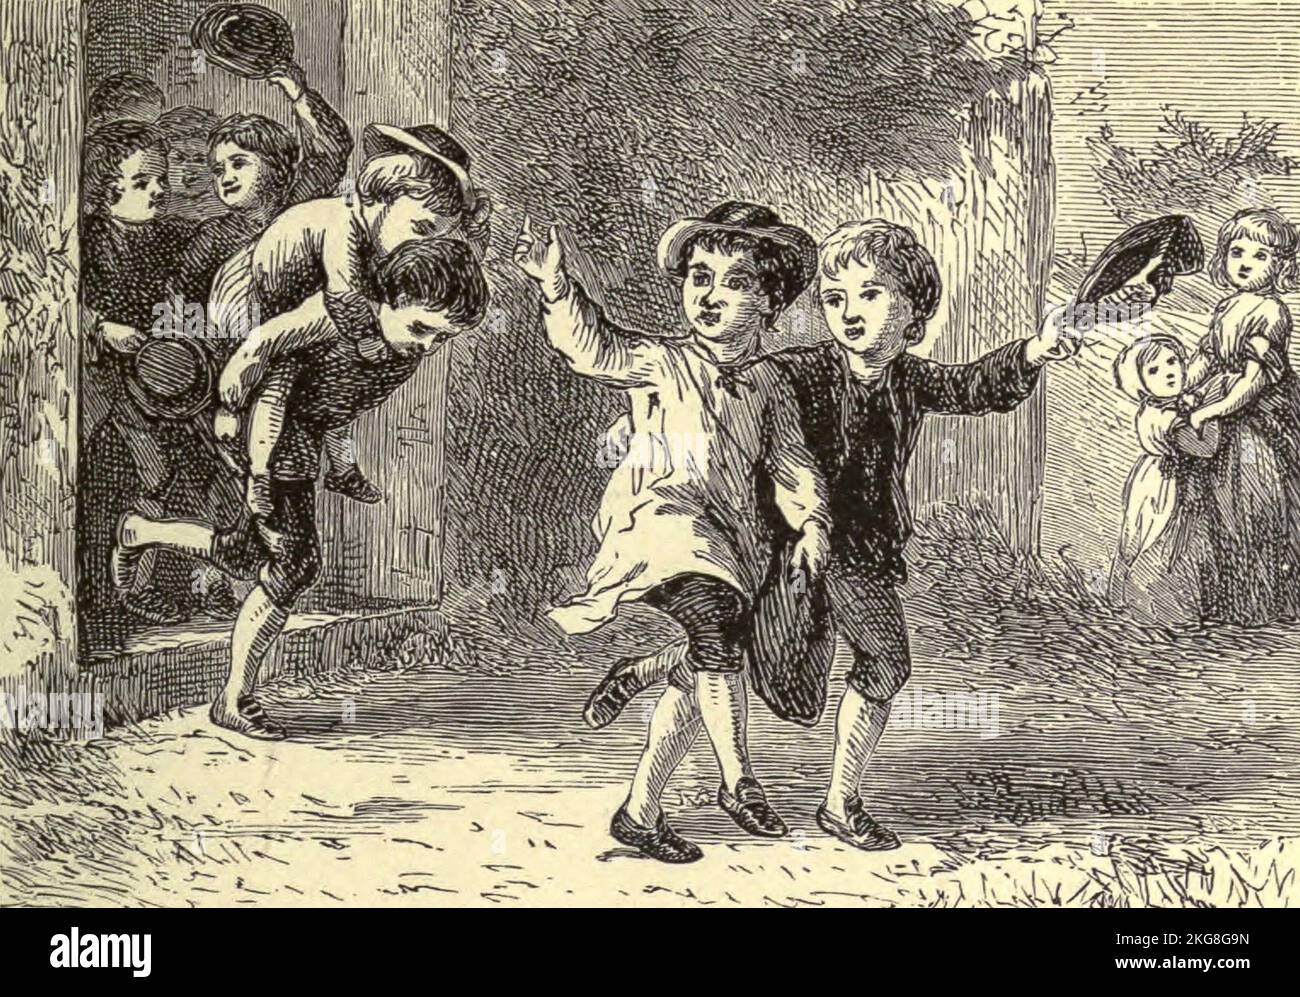 The playful children just let loose from school Illustration by Hammatt Billings from the poem The Deserted Village by Oliver Goldsmith published in 1882. The Deserted Village is a poem by Oliver Goldsmith published in 1770. It is a work of social commentary, and condemns rural depopulation and the pursuit of excessive wealth. Oliver Goldsmith (10 November 1728 – 4 April 1774) was an Anglo-Irish novelist, playwright, dramatist and poet, who is best known for his novel The Vicar of Wakefield (1766), his pastoral poem The Deserted Village (1770), and his plays The Good-Natur'd Man (1768) and She Stock Photo